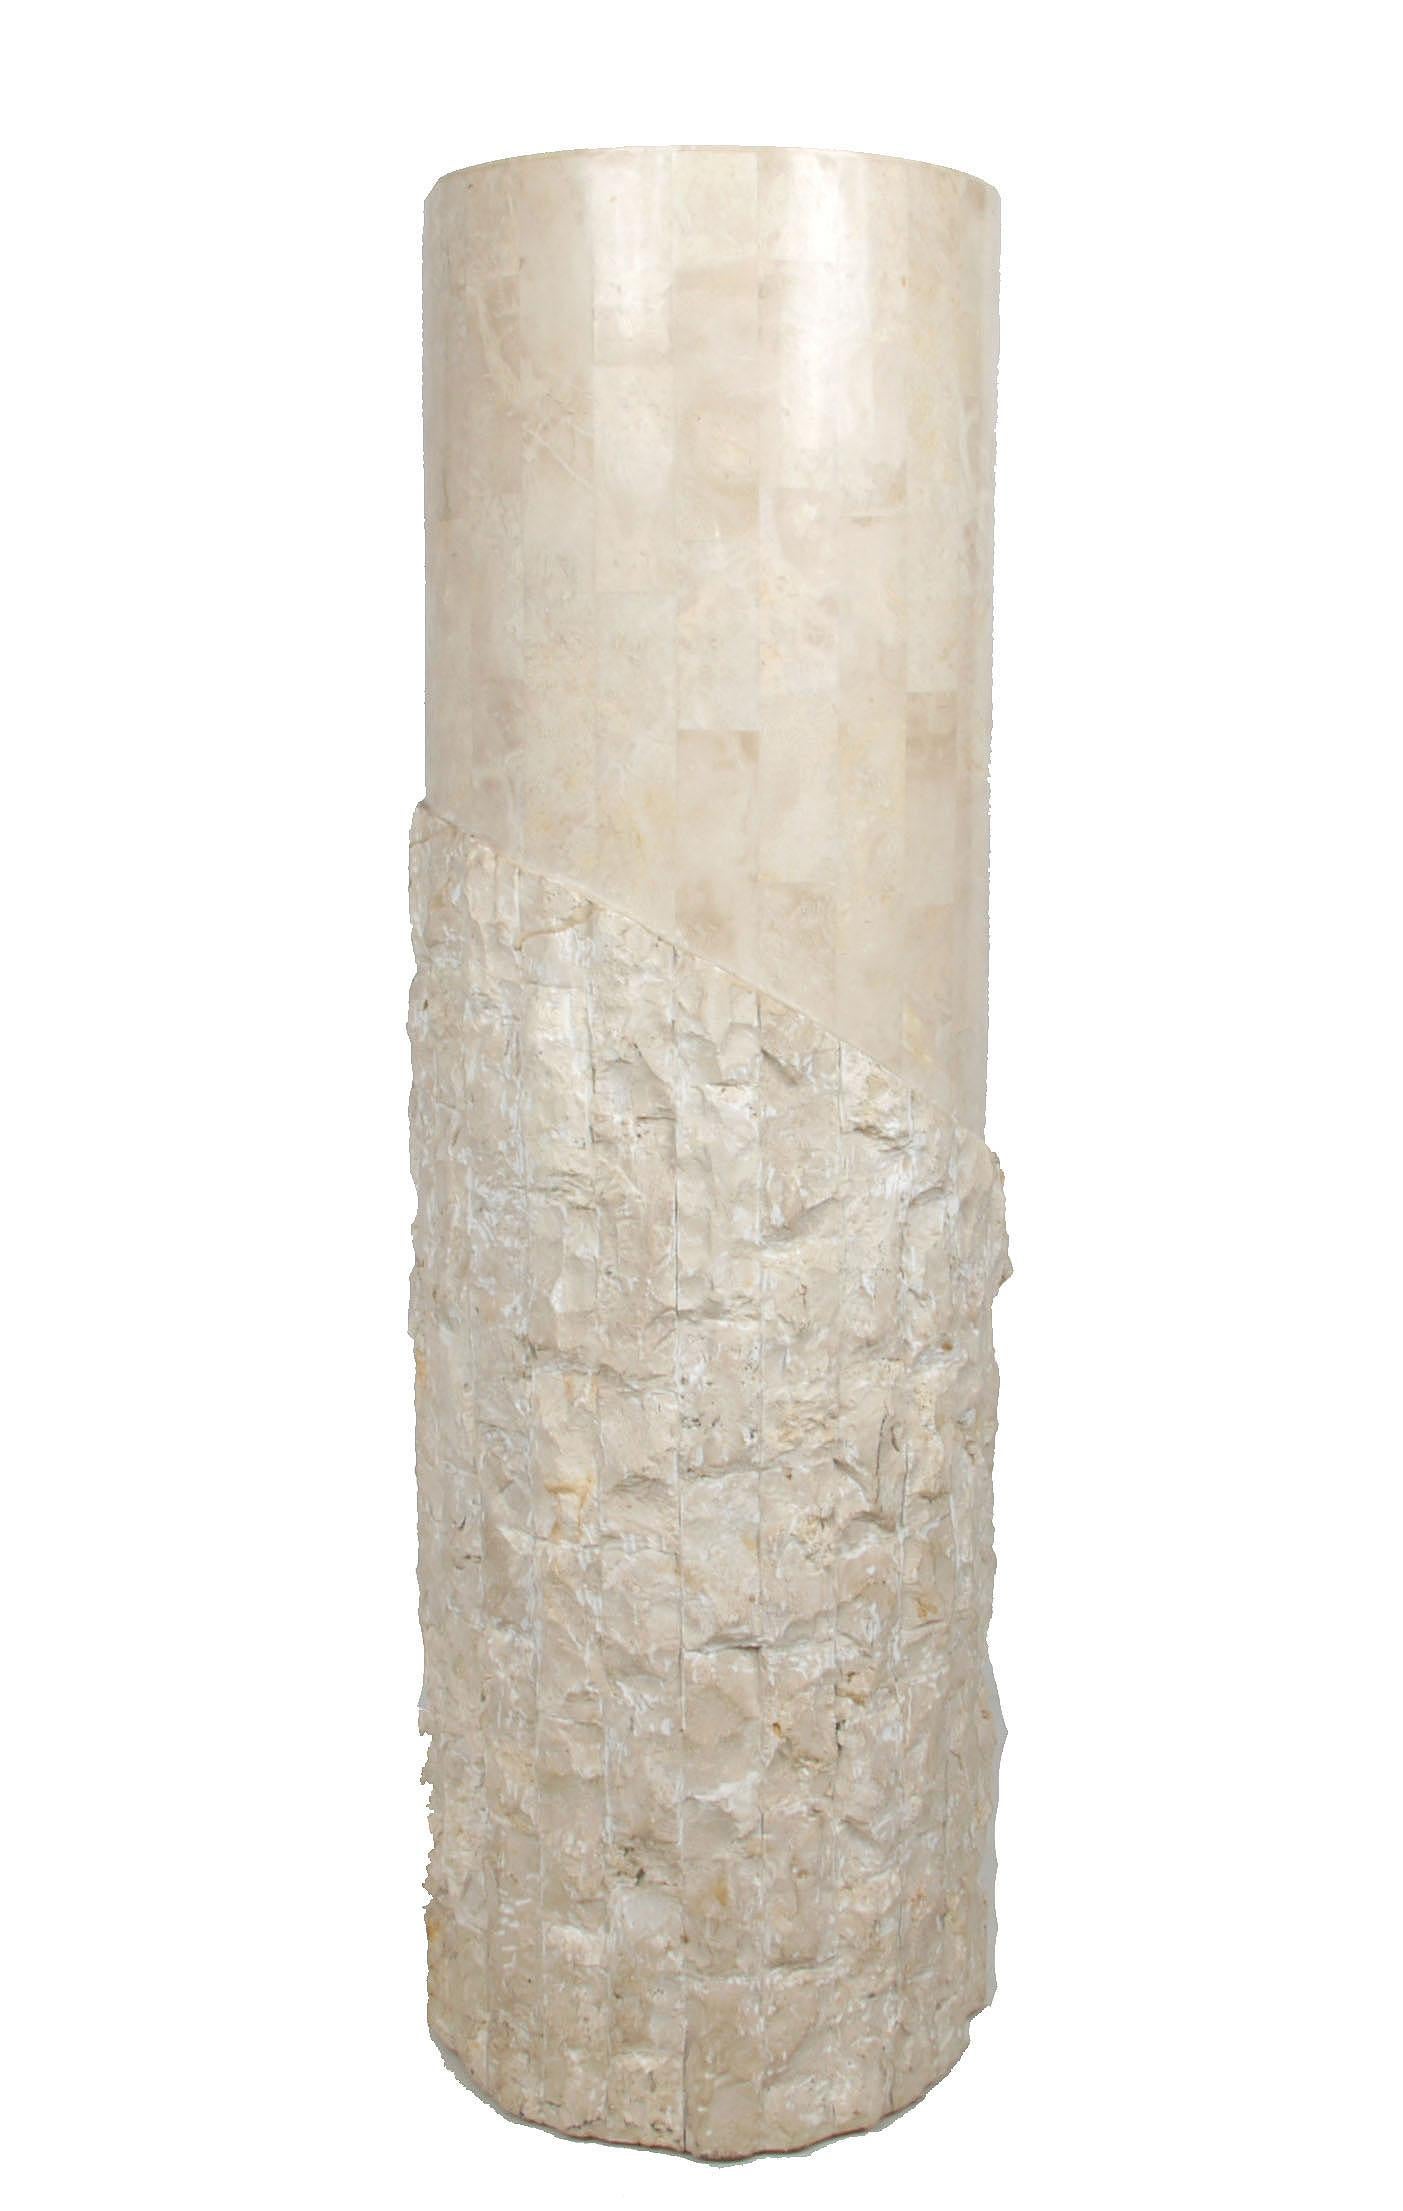 Hollywood Regency Maitland-Smith tessellated stone over wood pedestal.
Smooth texture around the top and chiseled stone at the bottom makes this pedestal so interesting. 
Stunner done and useful to display your favorite pieces of art.
 